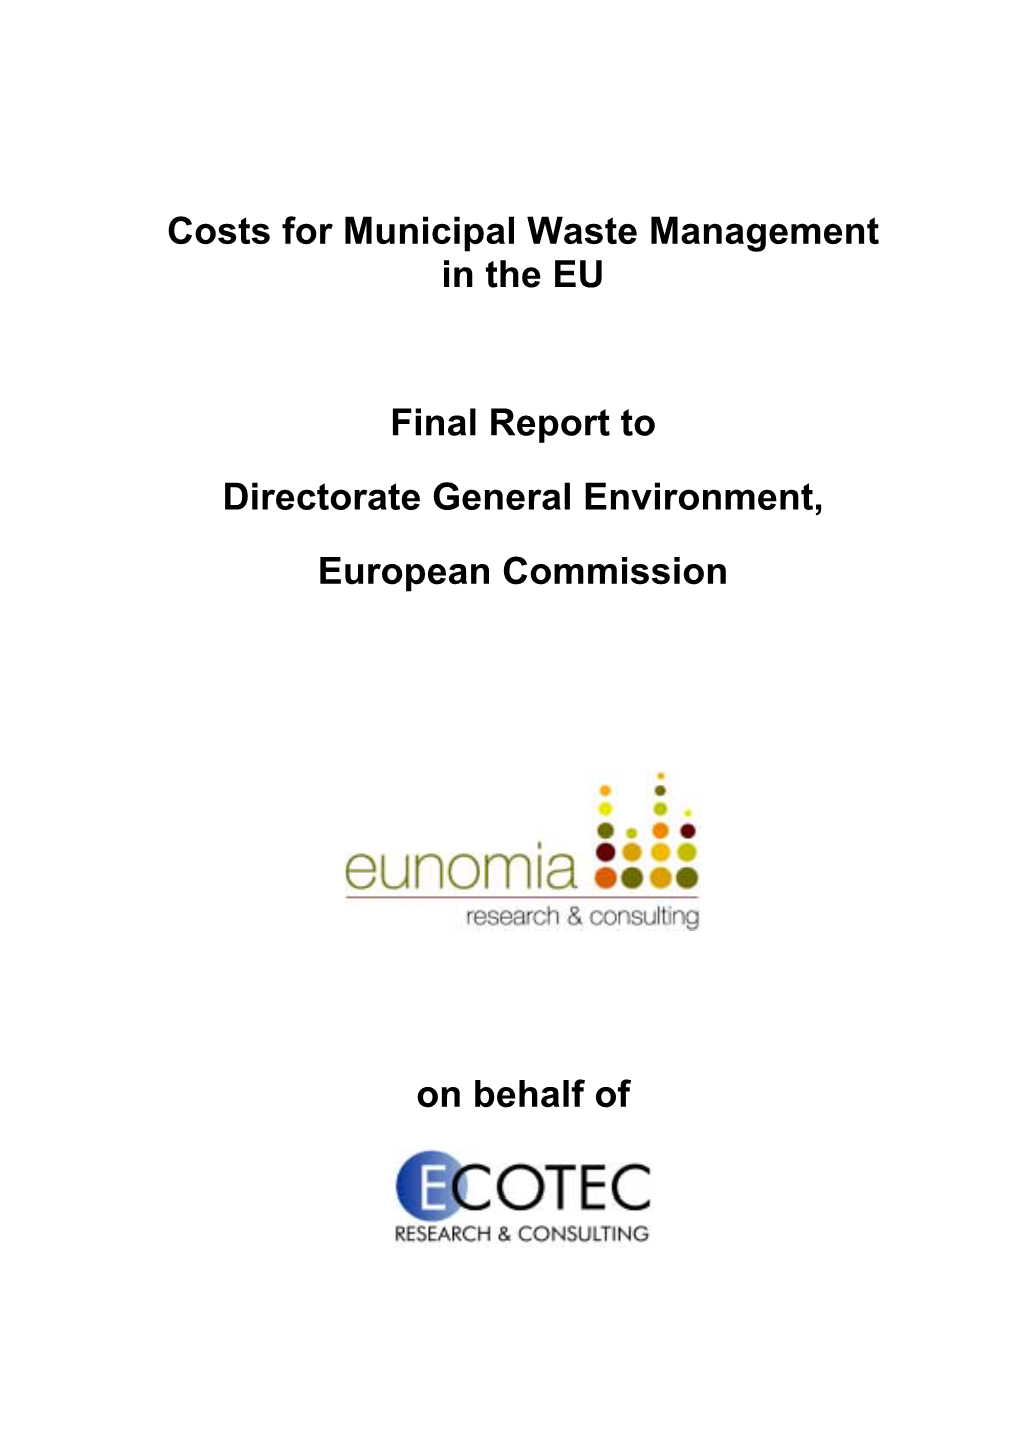 Costs for Municipal Waste Management in the EU